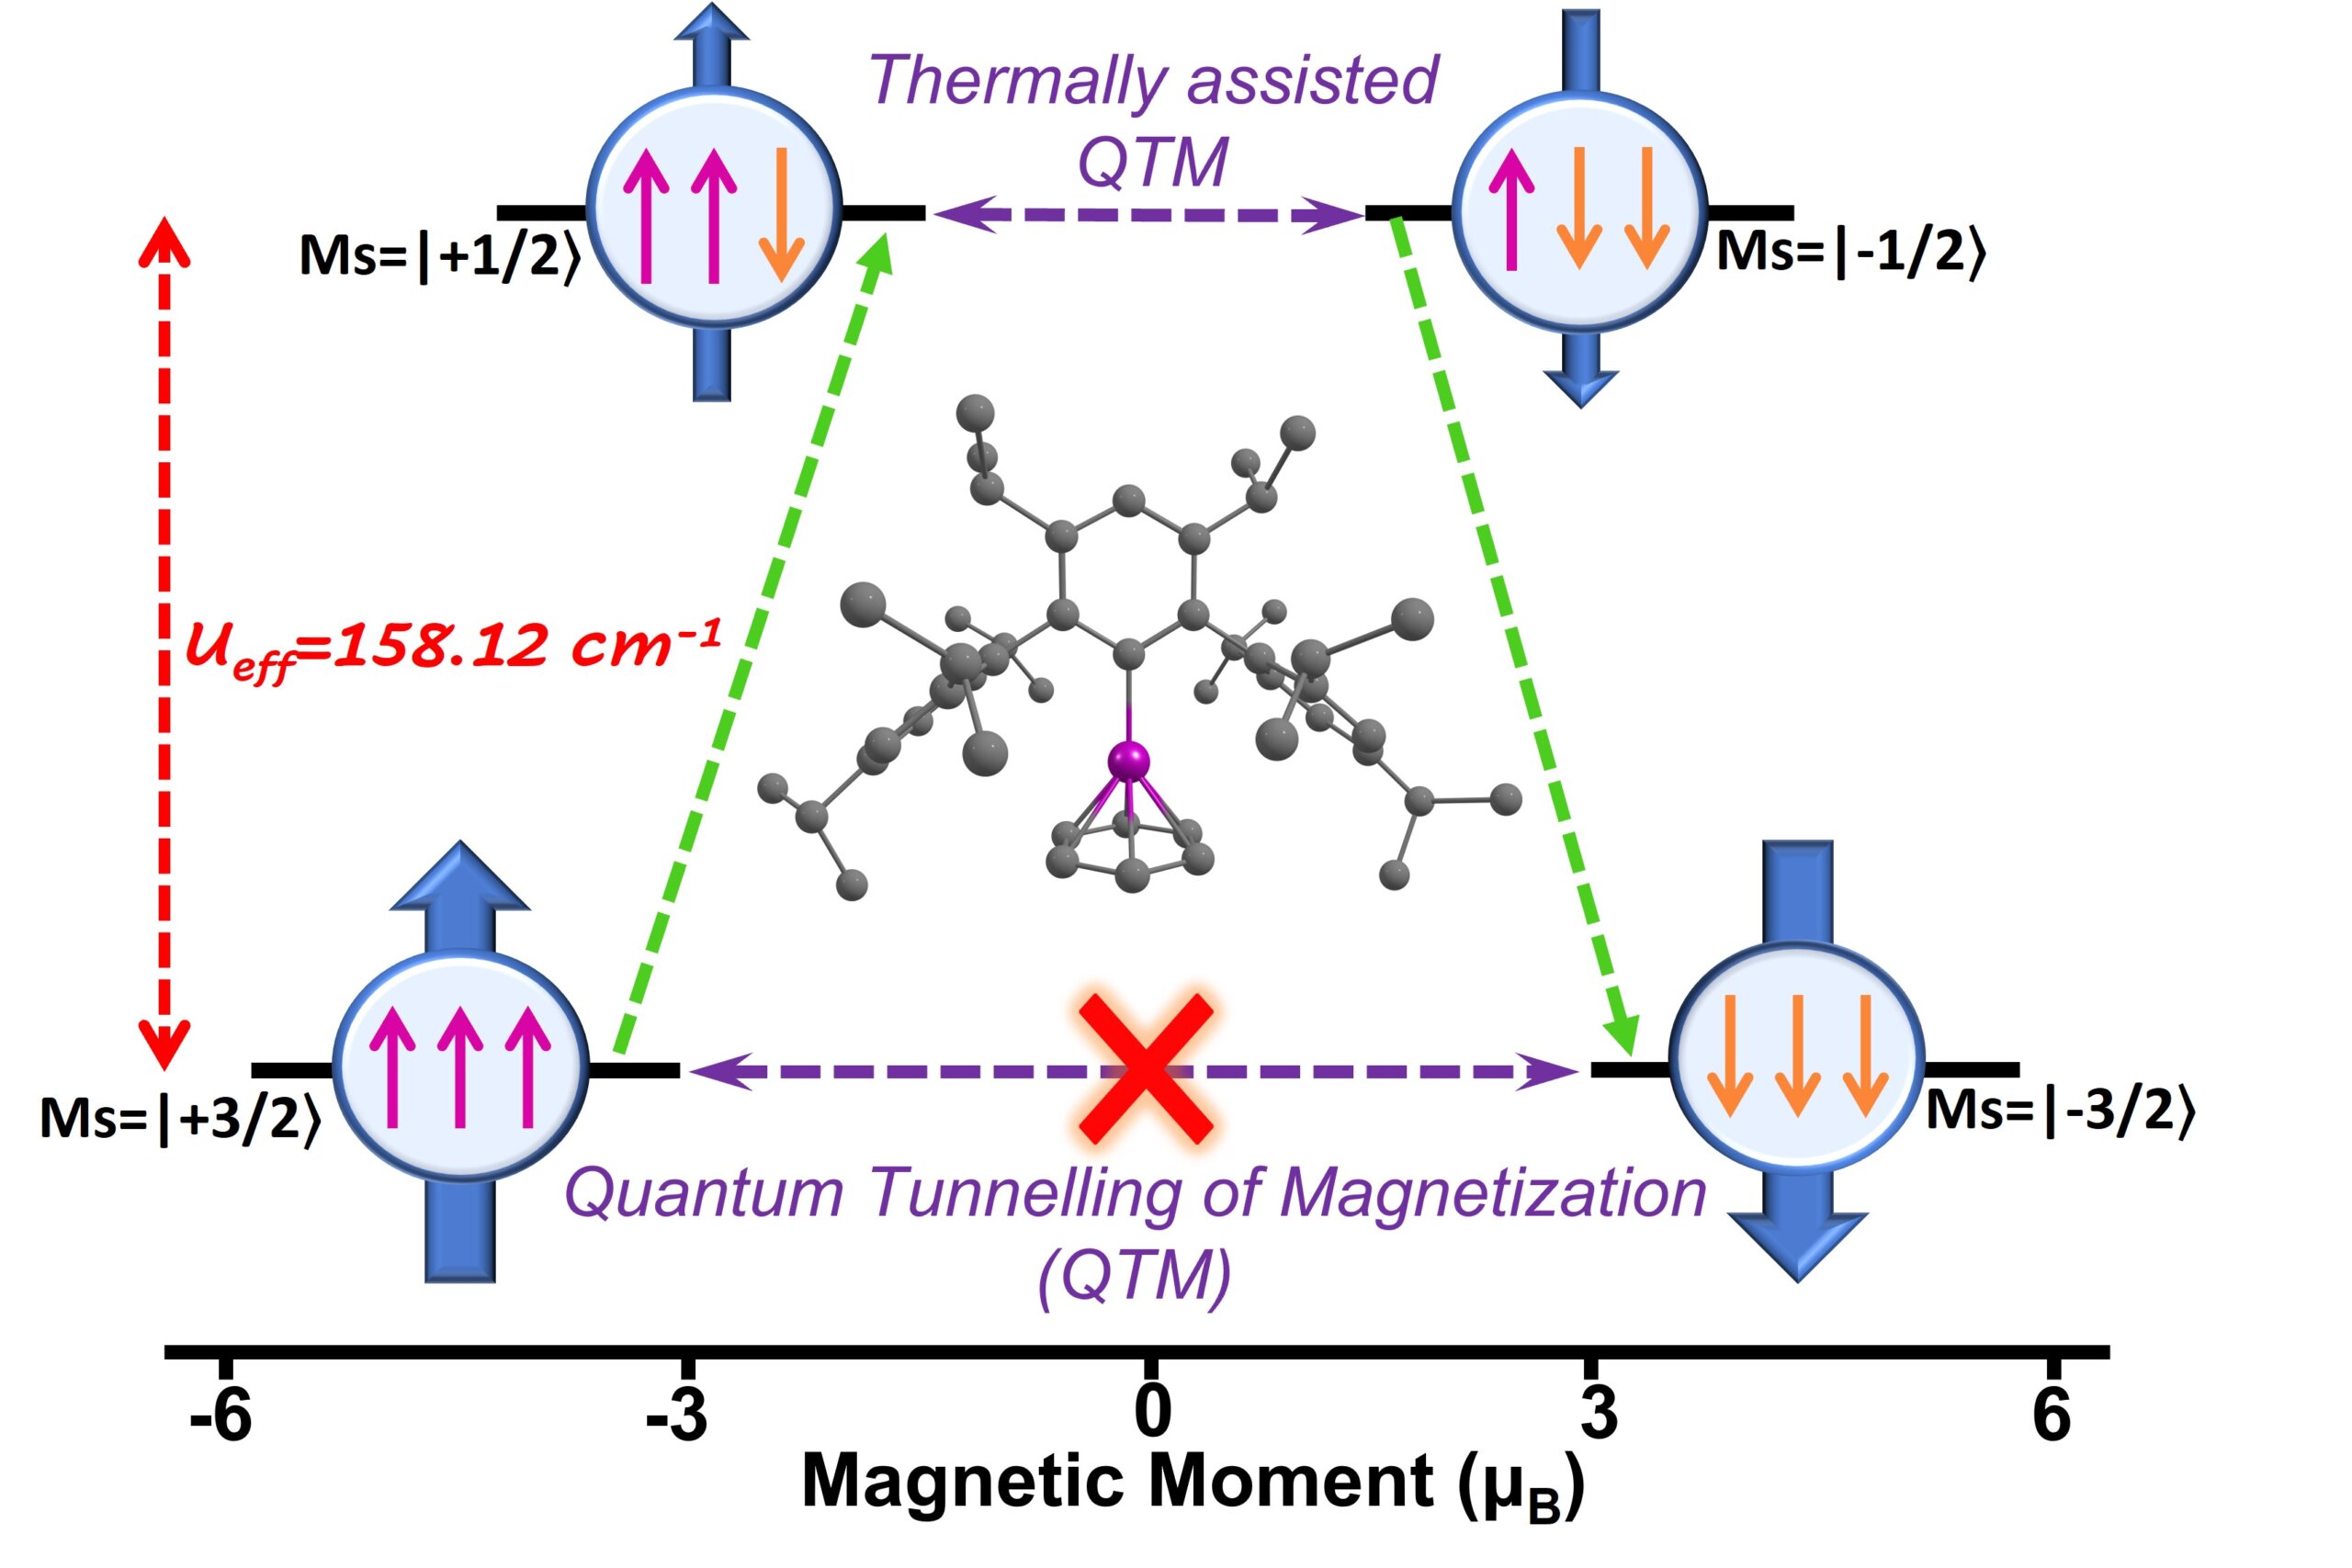 Single-Molecule Magnetism in Linear Fe(I) Complexes with Aufbau and Non-Aufbau Ground States